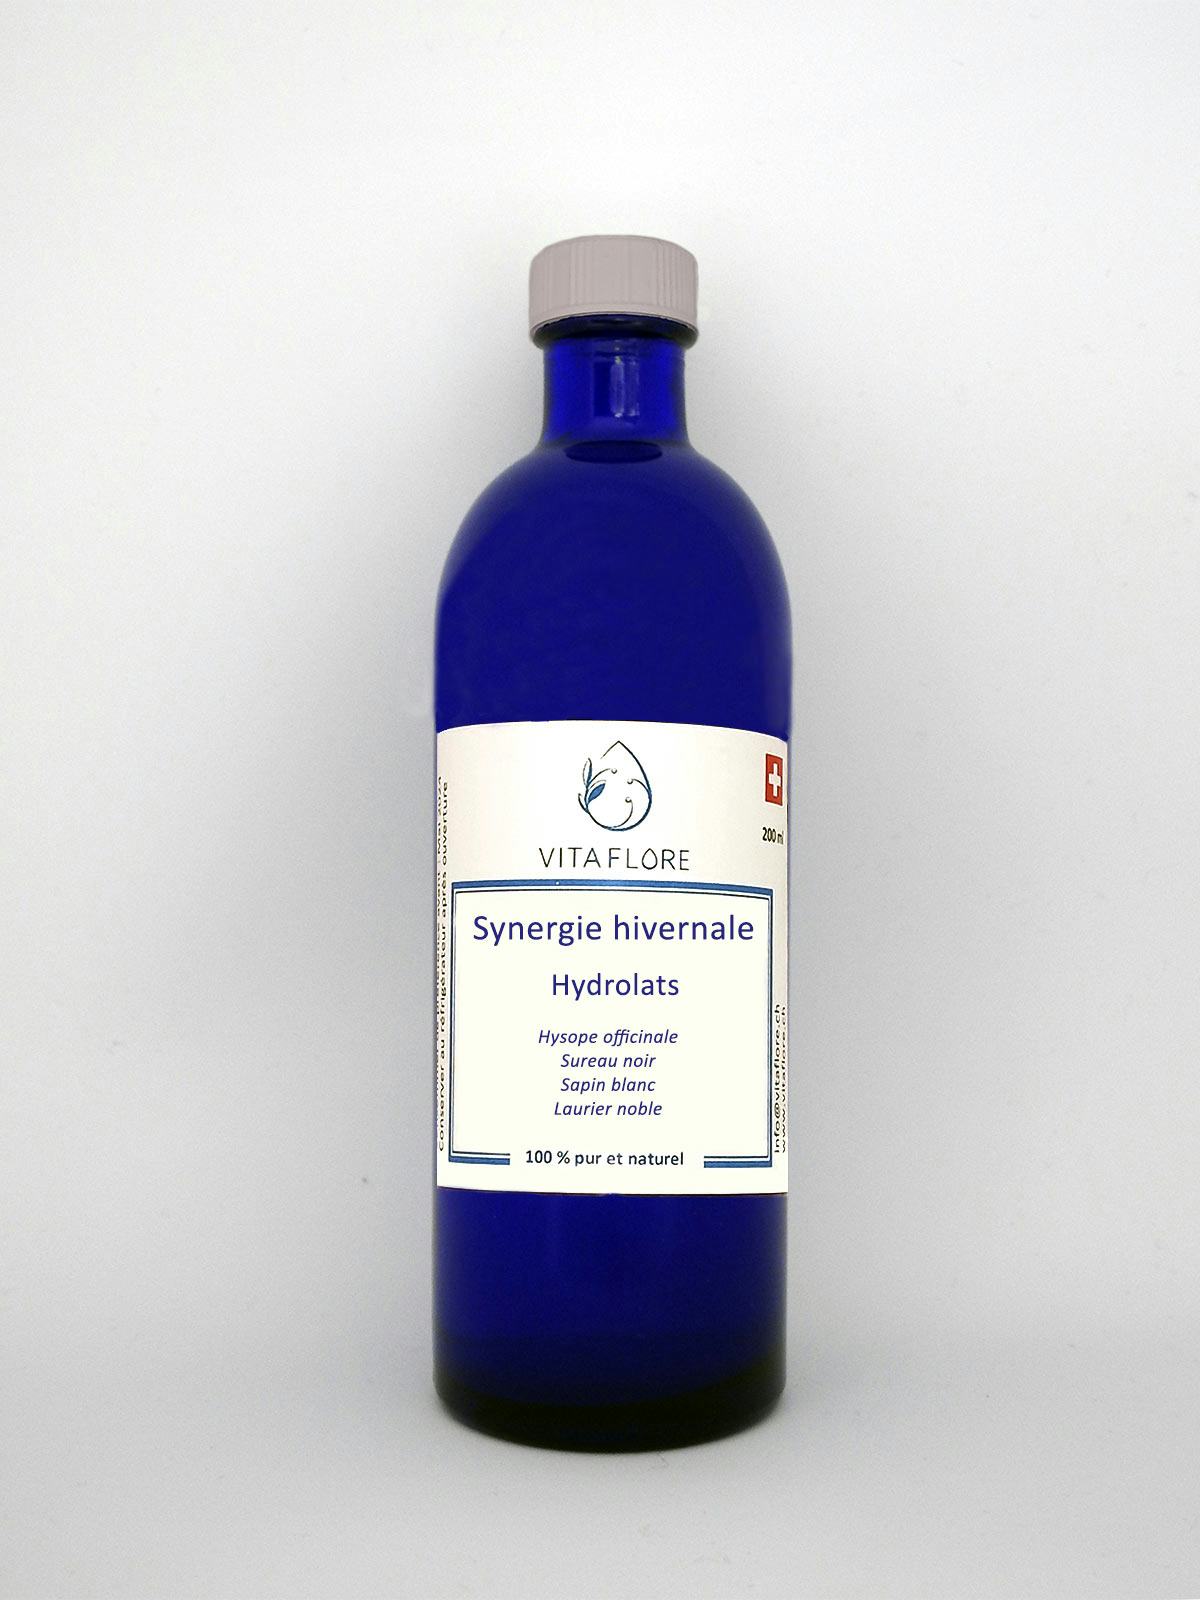 Synergie hivernale, artisanal product for direct sale in Switzerland